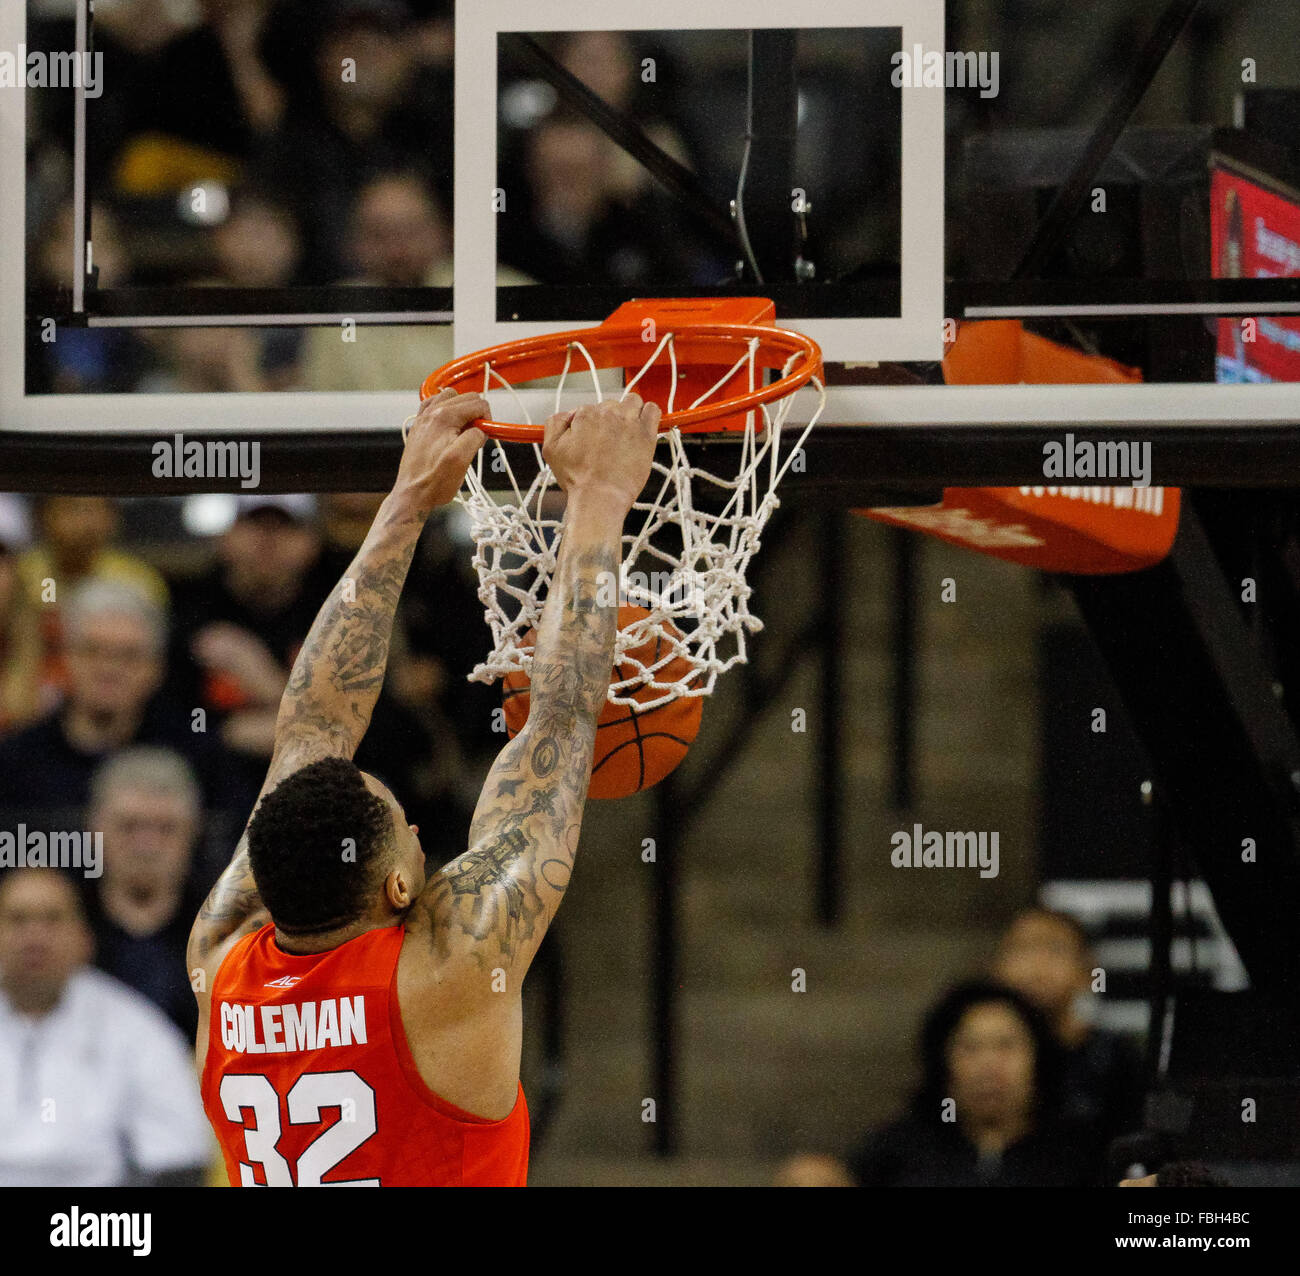 Winston-Salem, NC, USA. 16th Jan, 2016. DaJuan Coleman (32) of the Syracuse Orange with the slam in the NCAA Basketball match-up between the Syracuse Orangemen and the Wake Forest Demon Deacons at Lawerence Joel Veteran Memorial Coliseum in Winston-Salem, NC. Scott Kinser/CSM/Alamy Live News Stock Photo